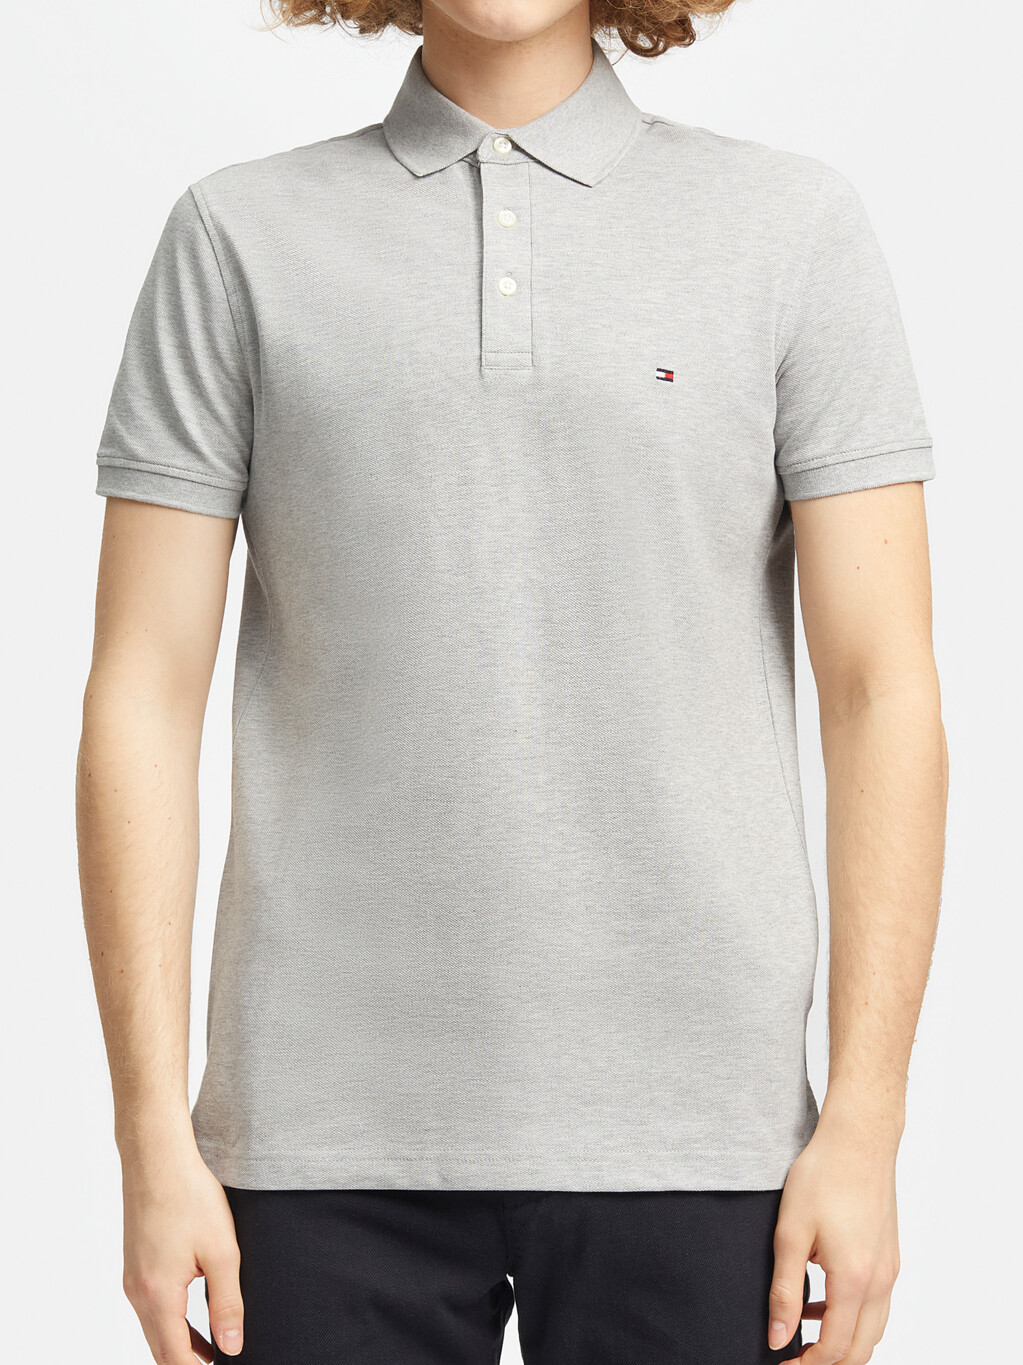 1985 Collection Slim Fit Polo, Light Grey Heather, hi-res